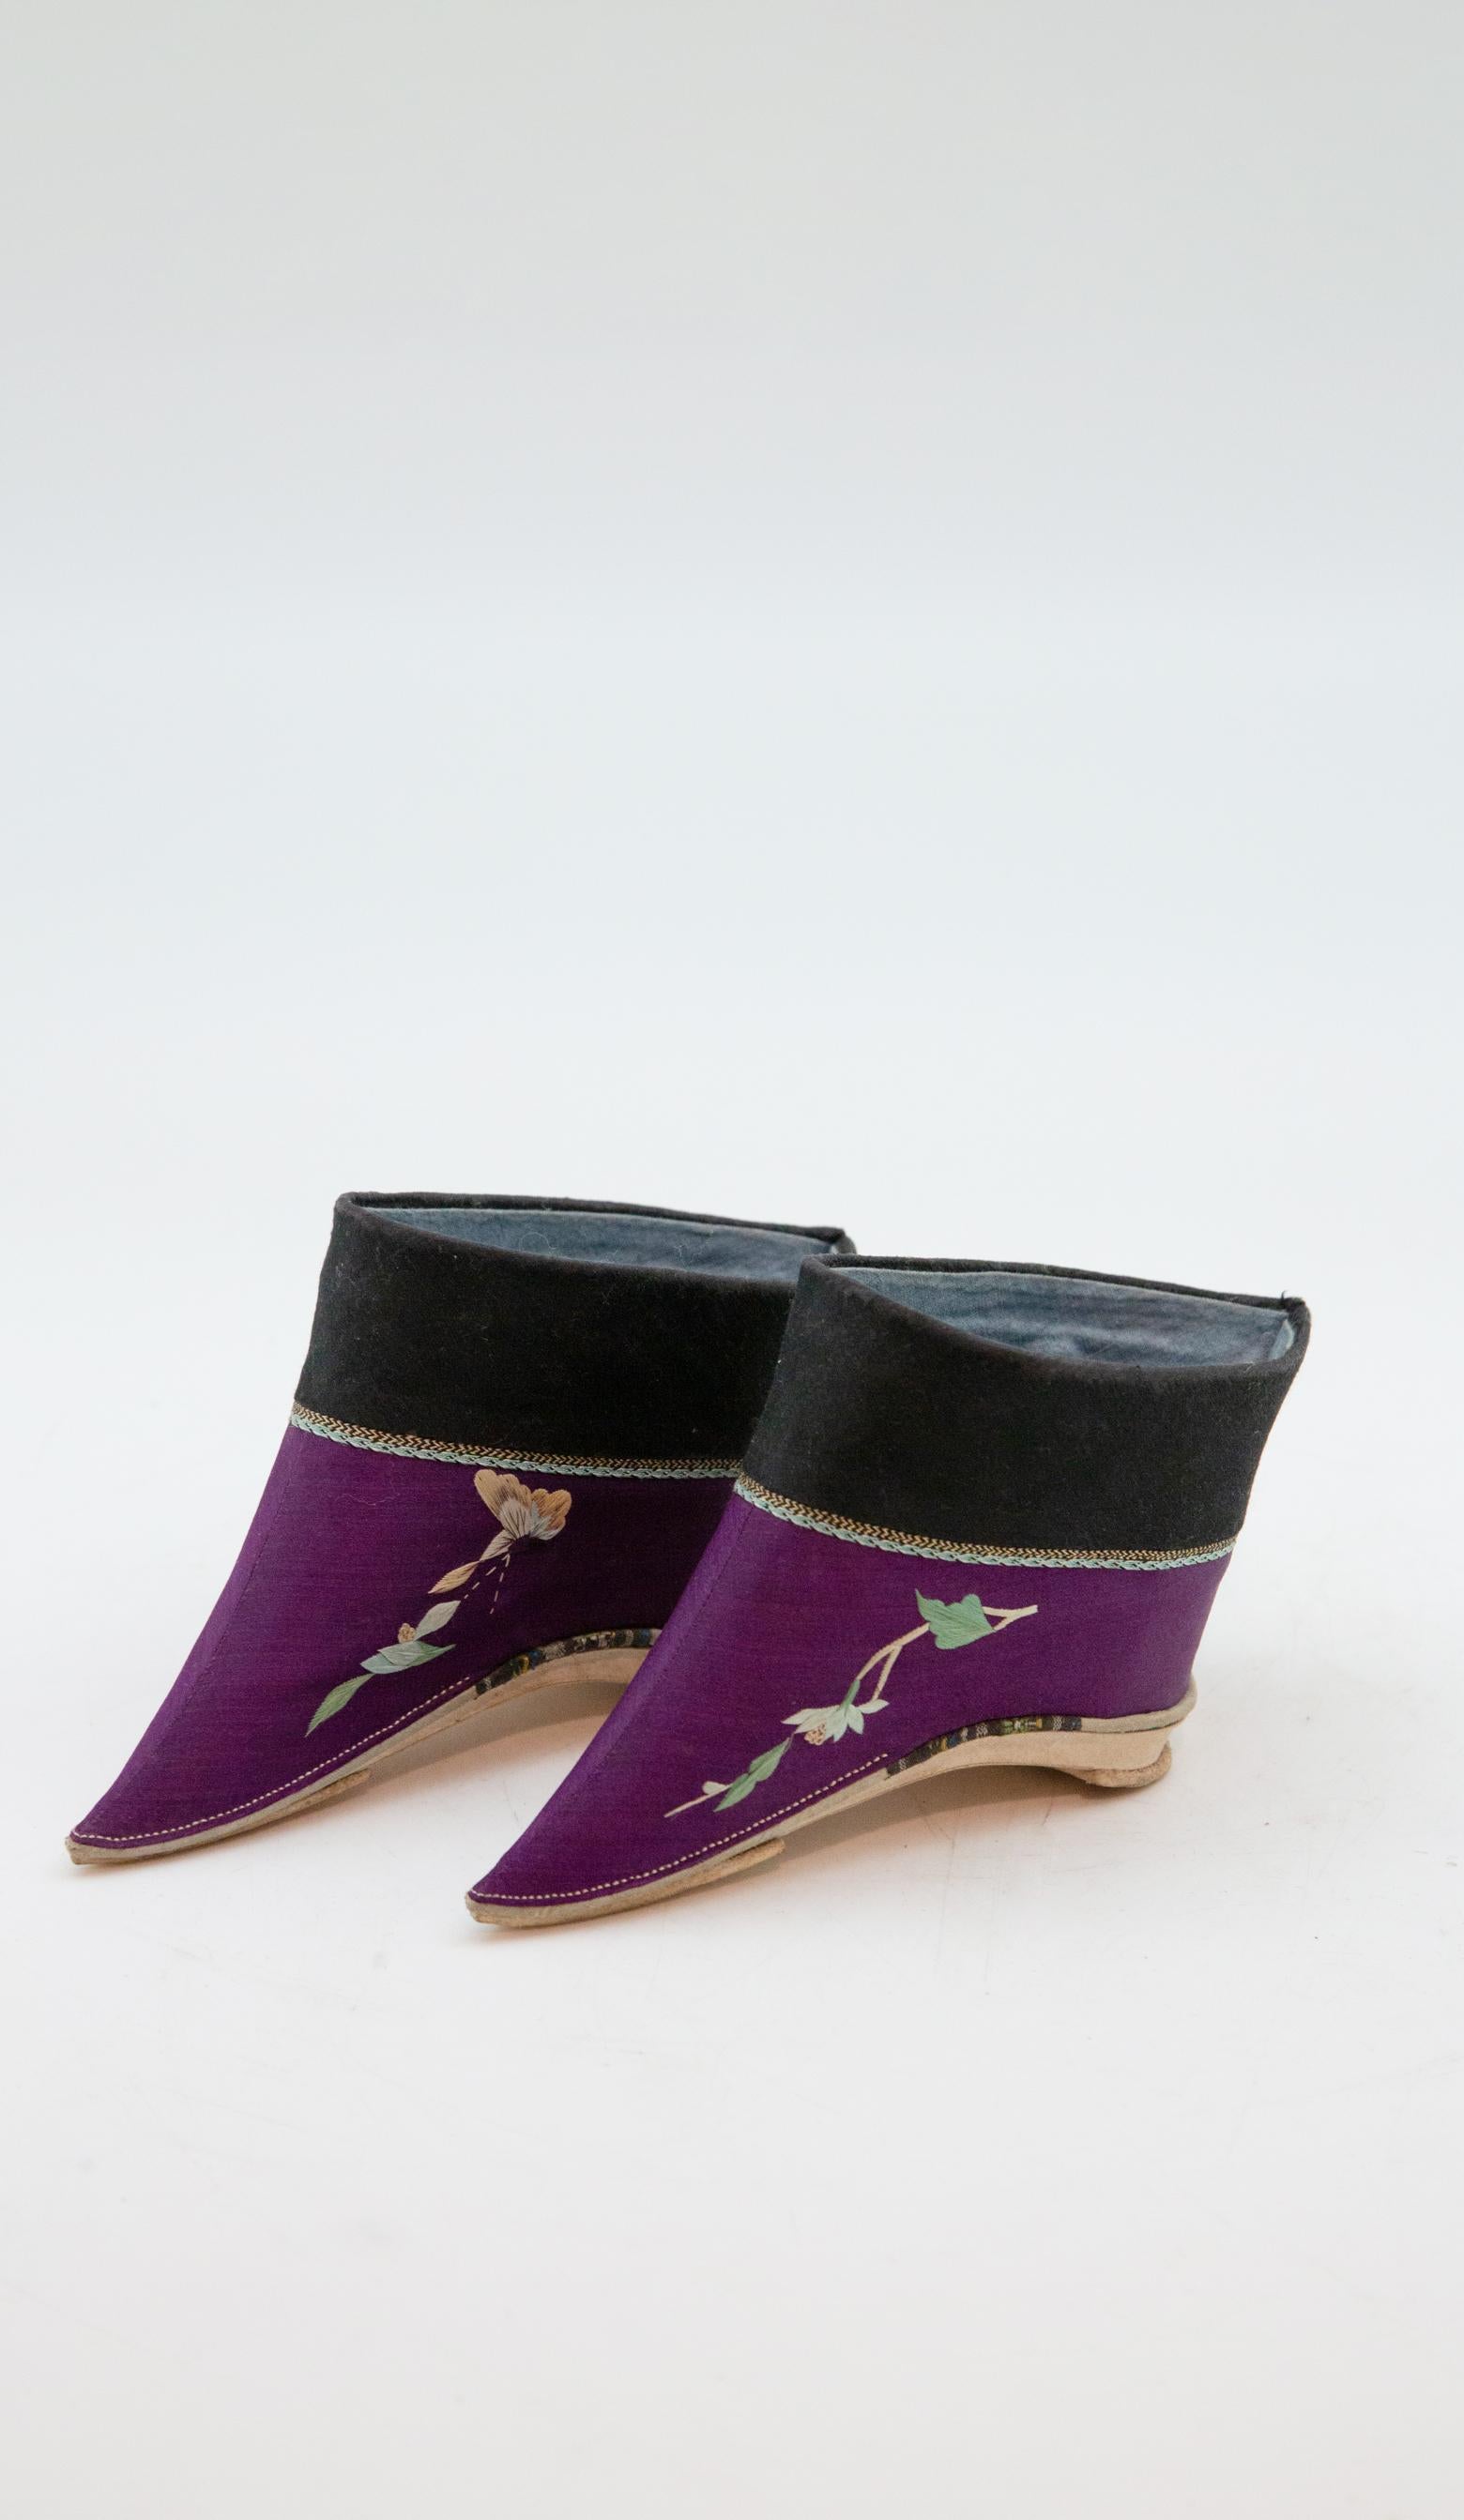 20th Century Silk Embroidered Chinese Bound Foot Shoes